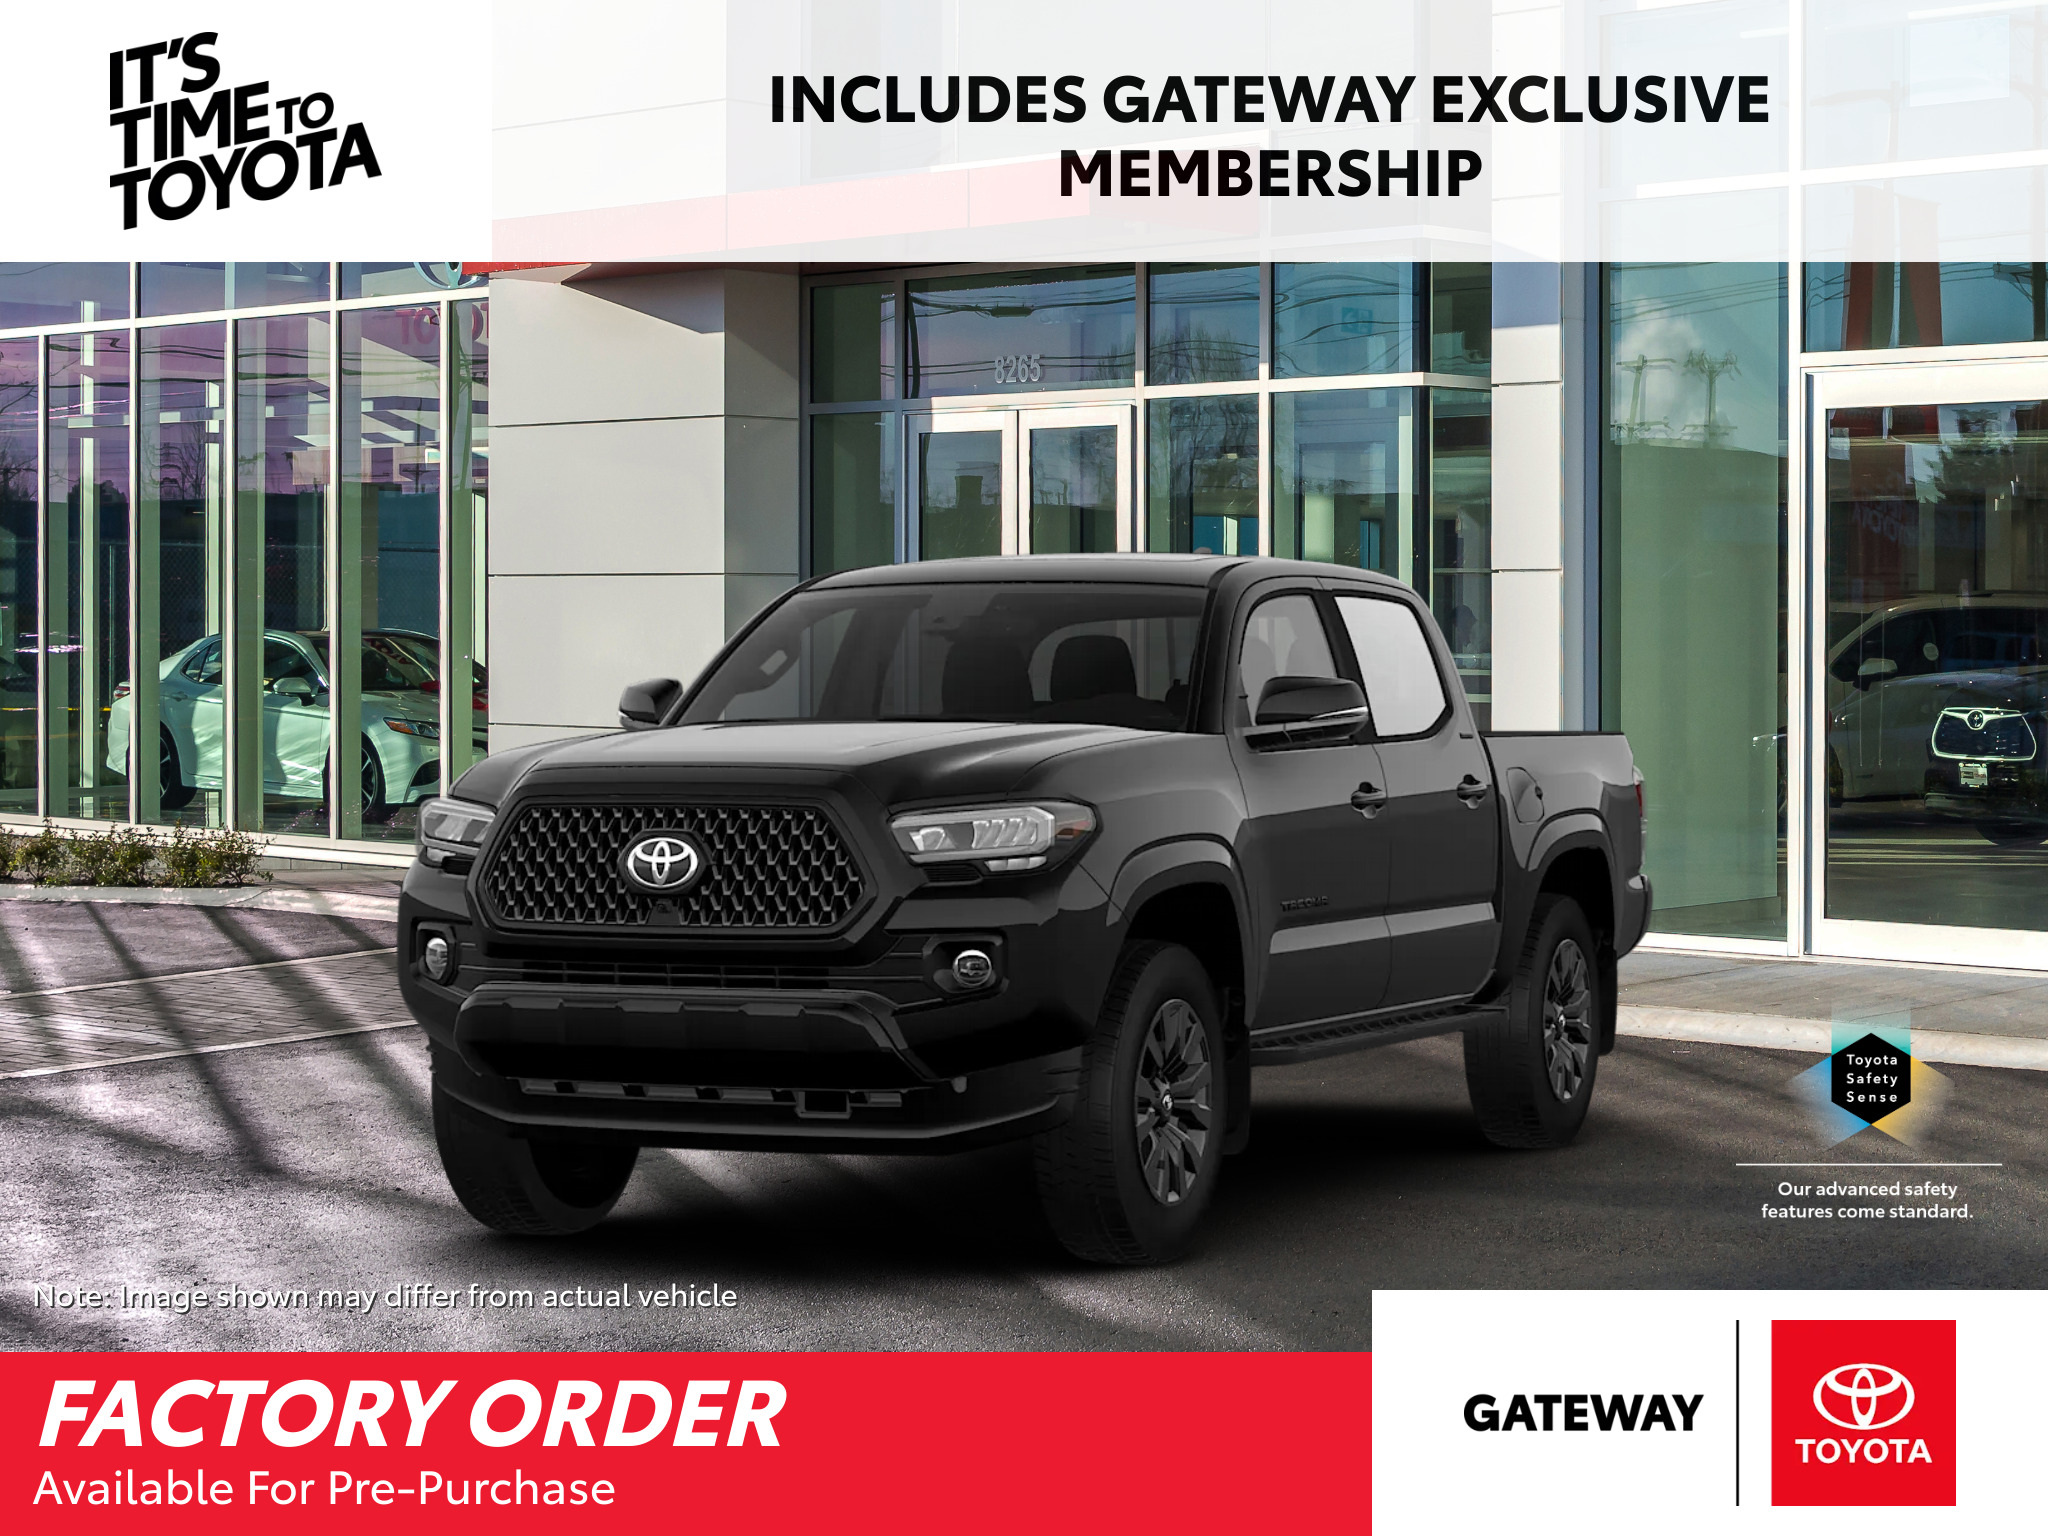 2023 Toyota Tacoma LTD Nightshade FACTORY ORDER, DELIVERY DATES VARY 